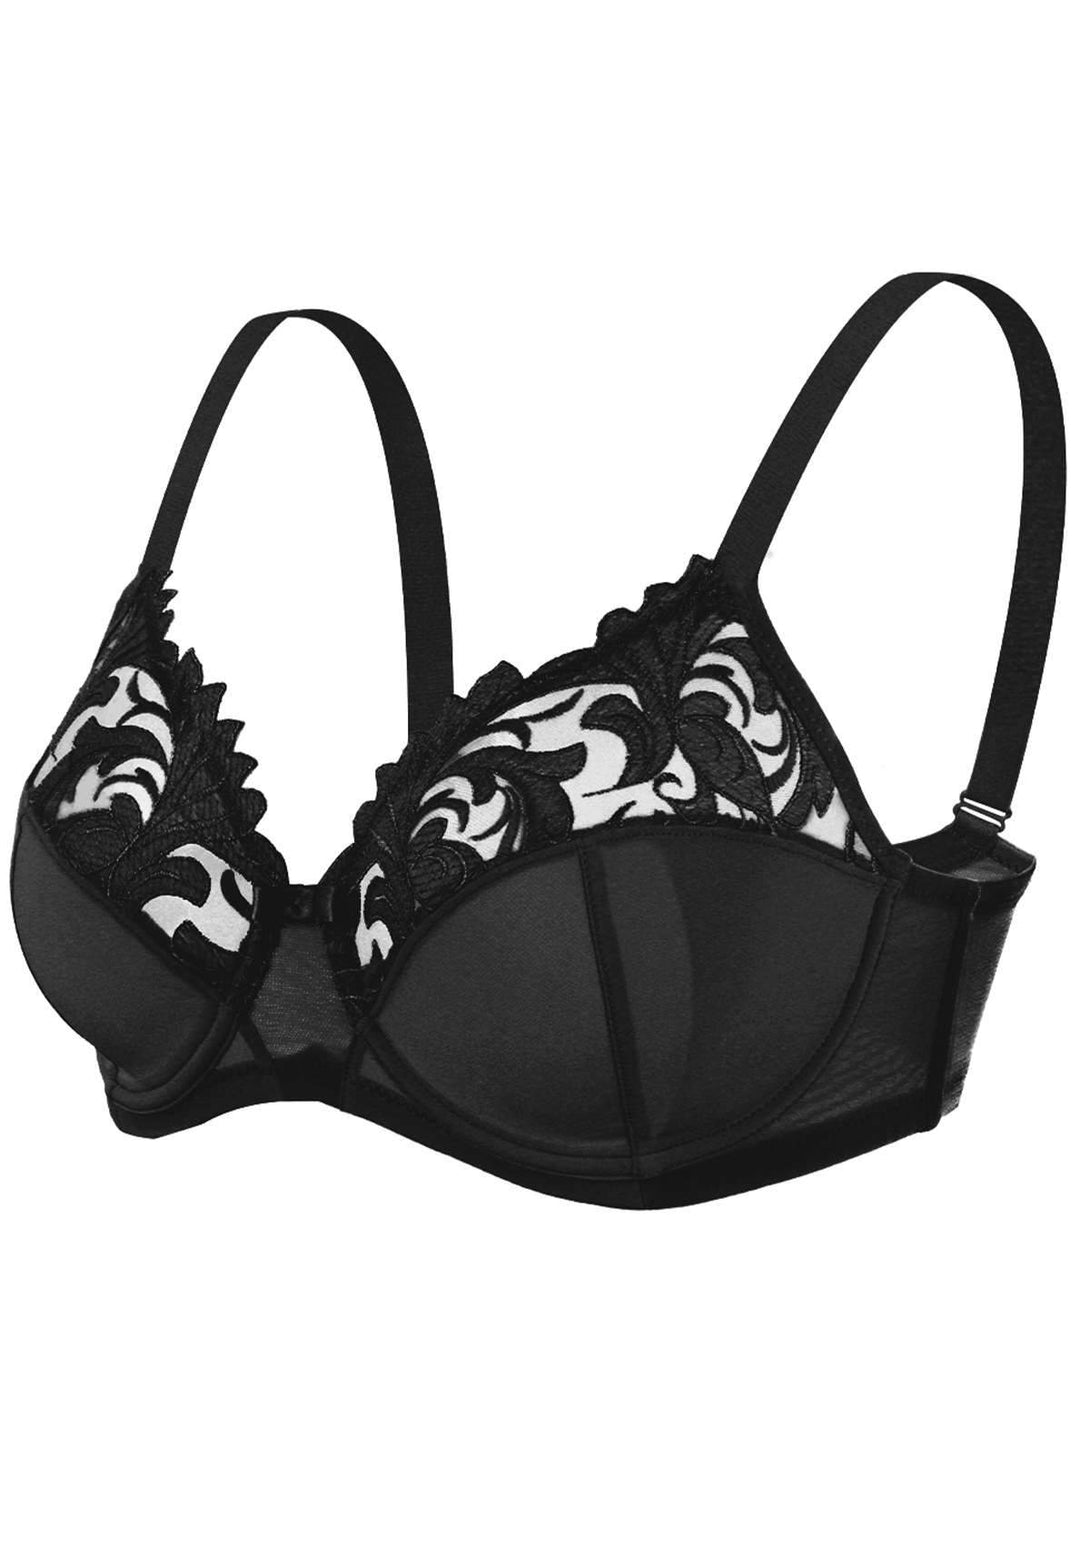 HSIA HSIA Embroidered Unlined Bra 34C / Black